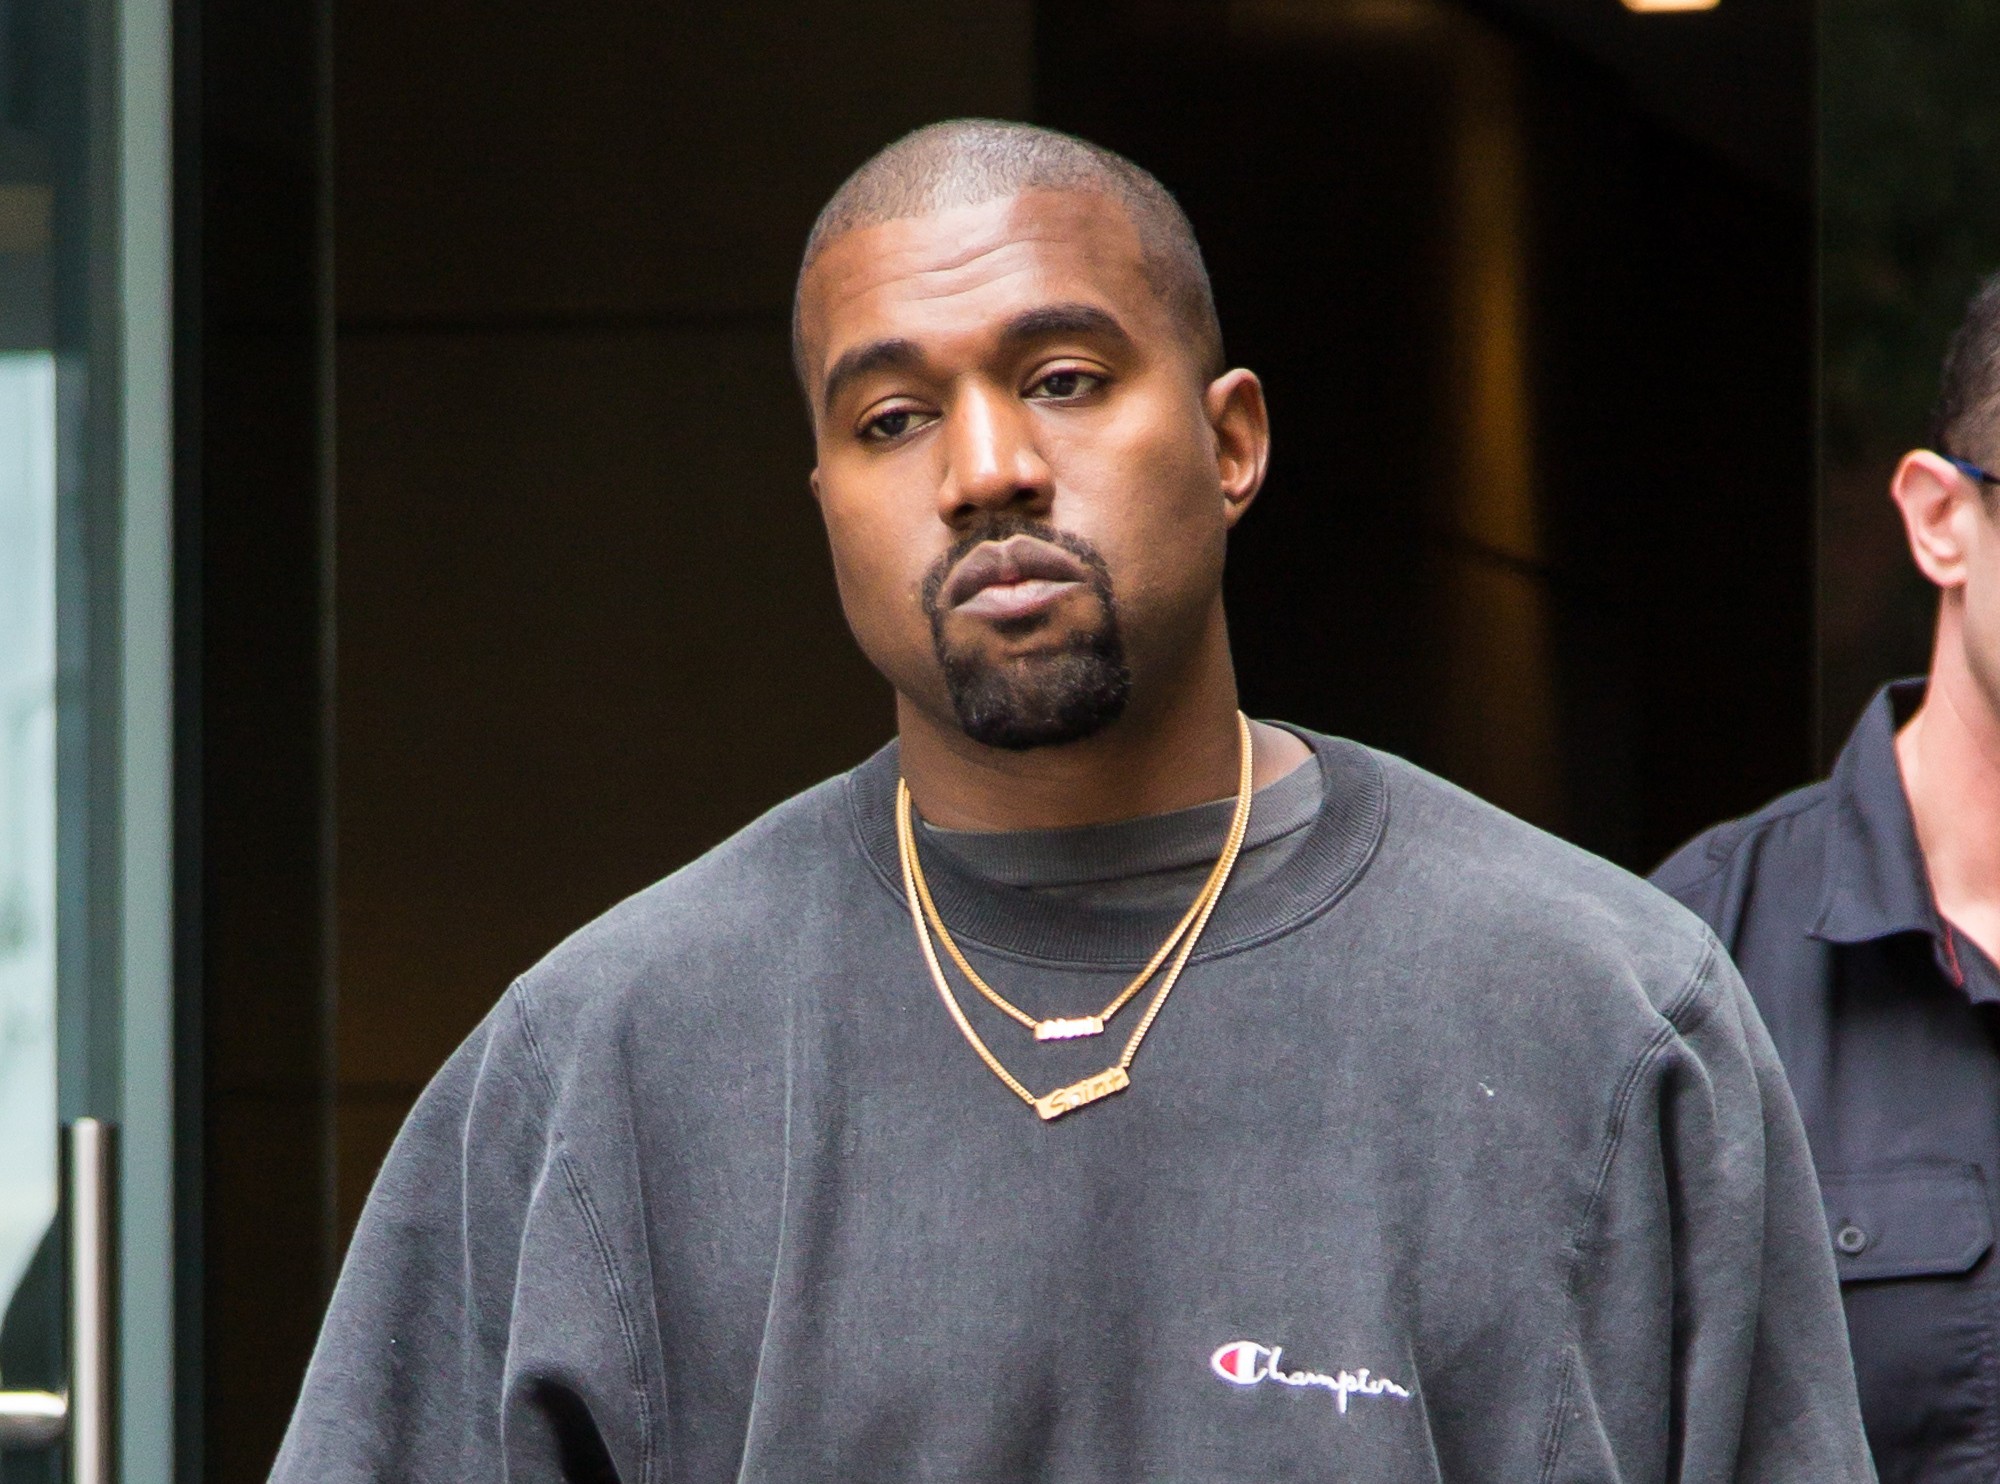 Kanye West’s “Jesus Is King” Album Delayed With No New Release Date